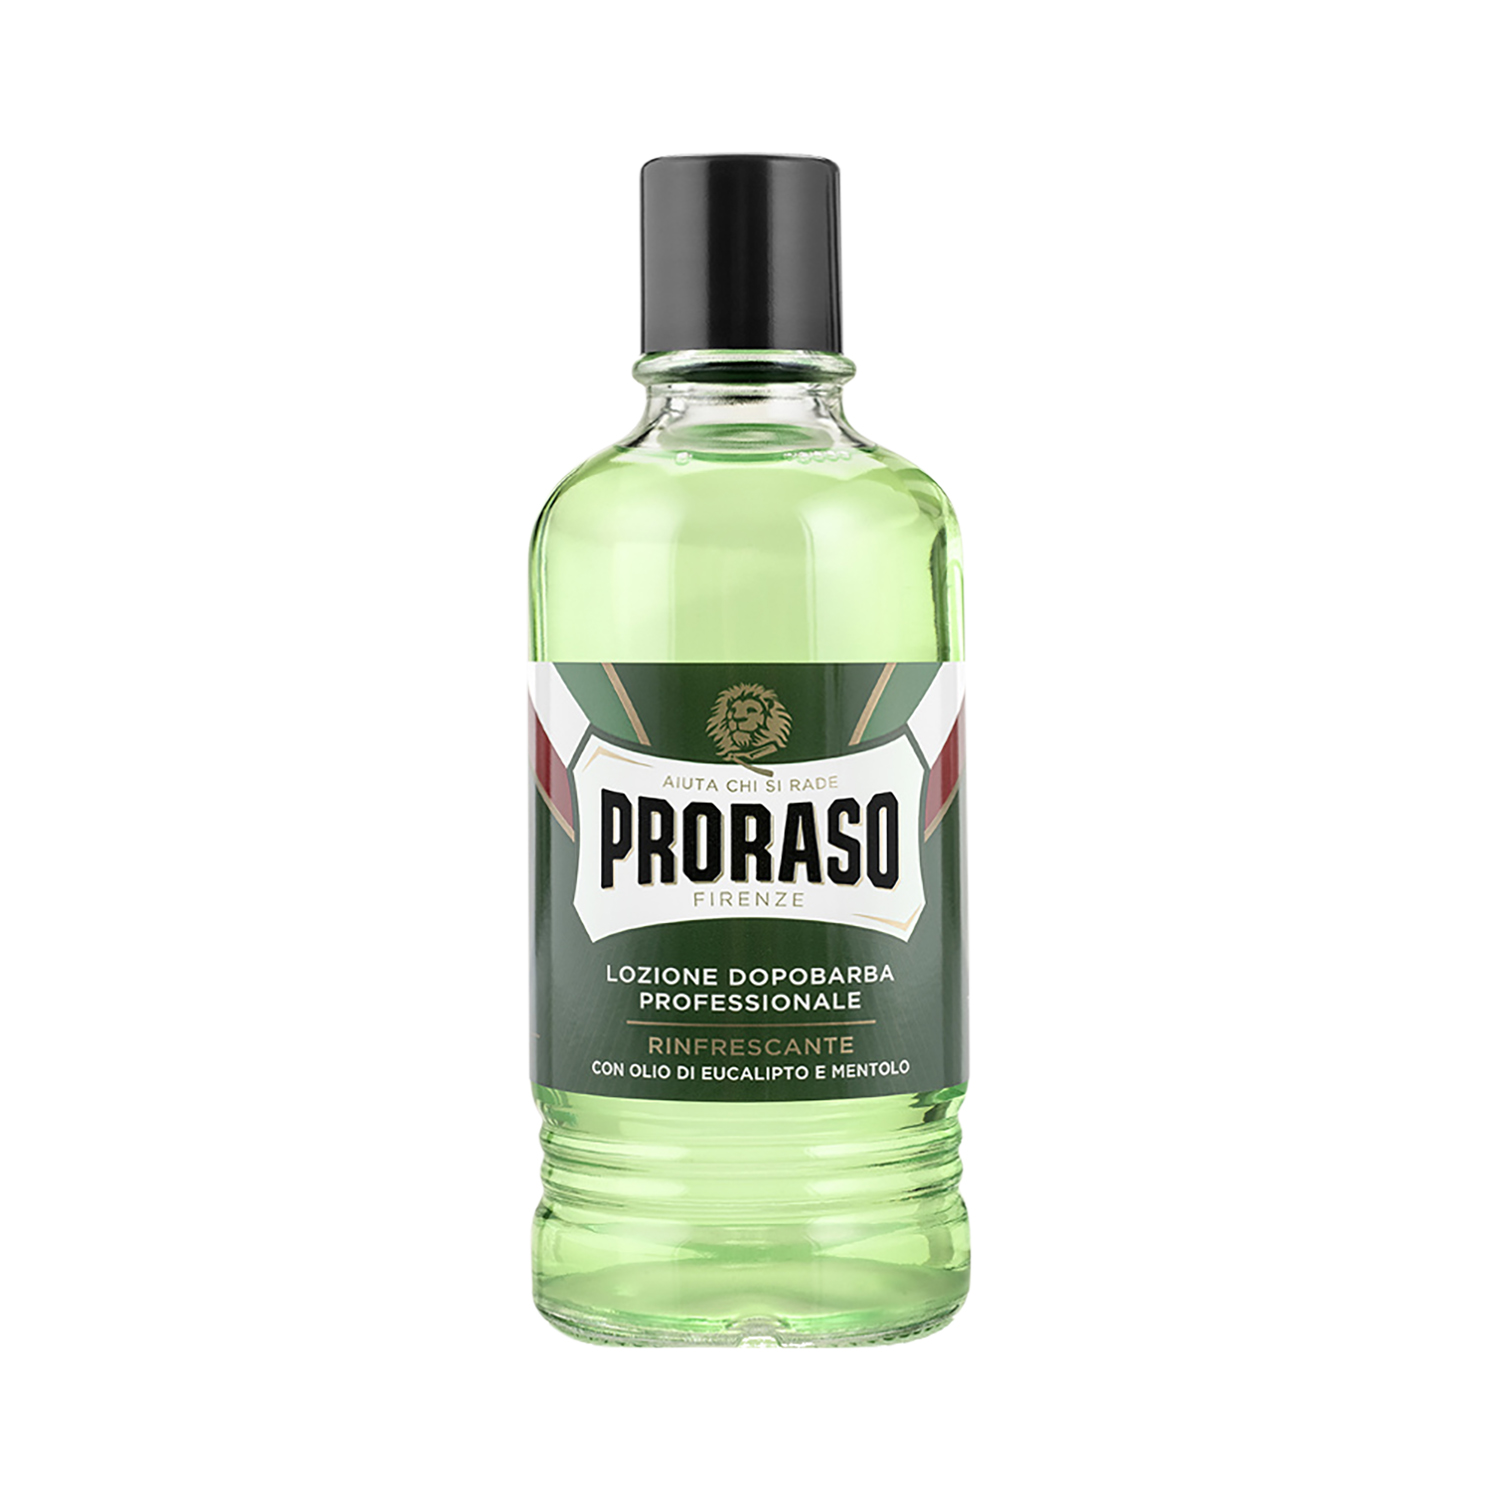 Proraso - After Shave Lotion - GREEN